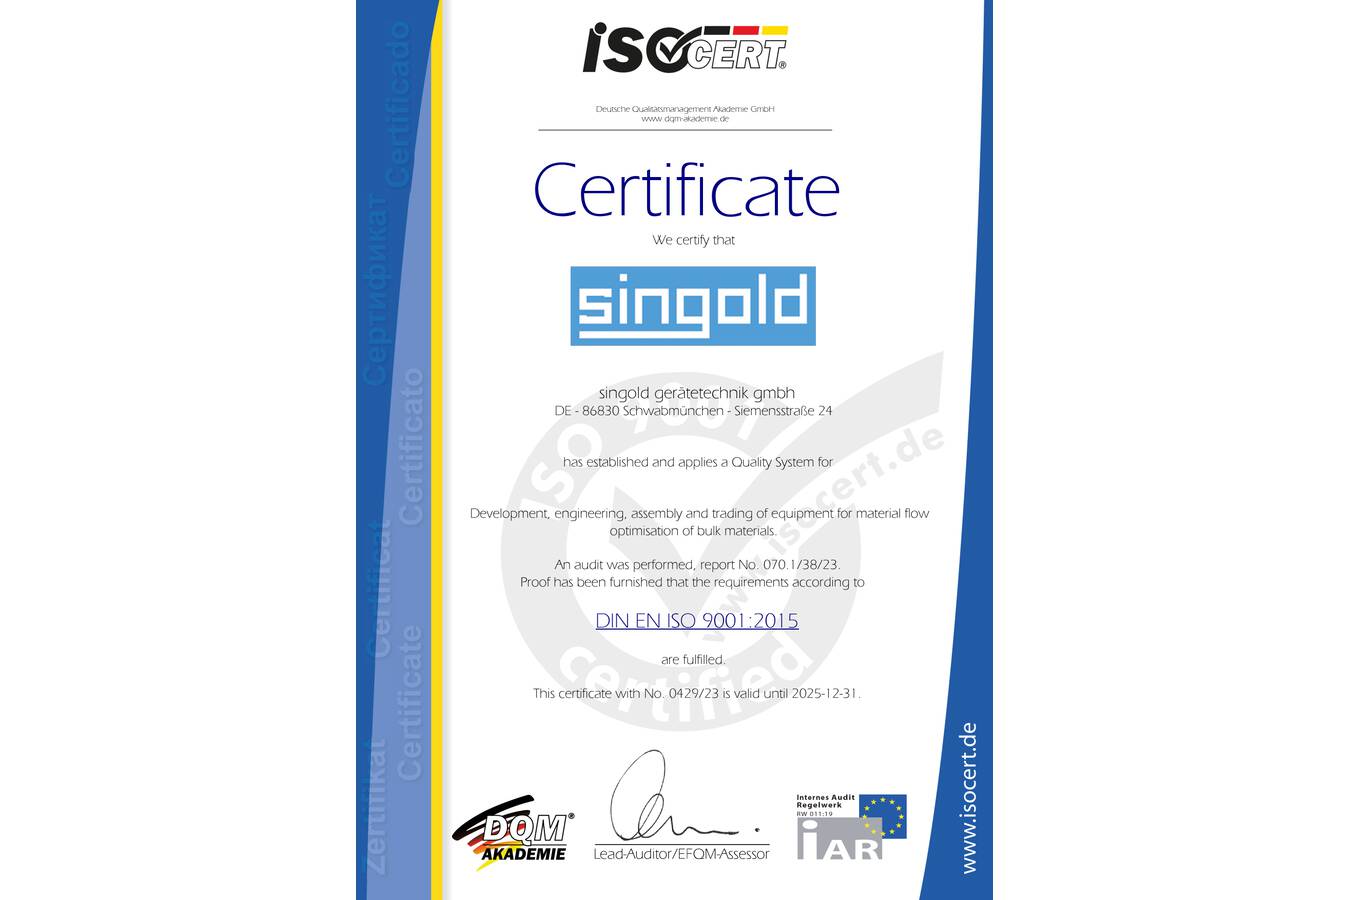 singold receives ISO 9001:2015 certification 